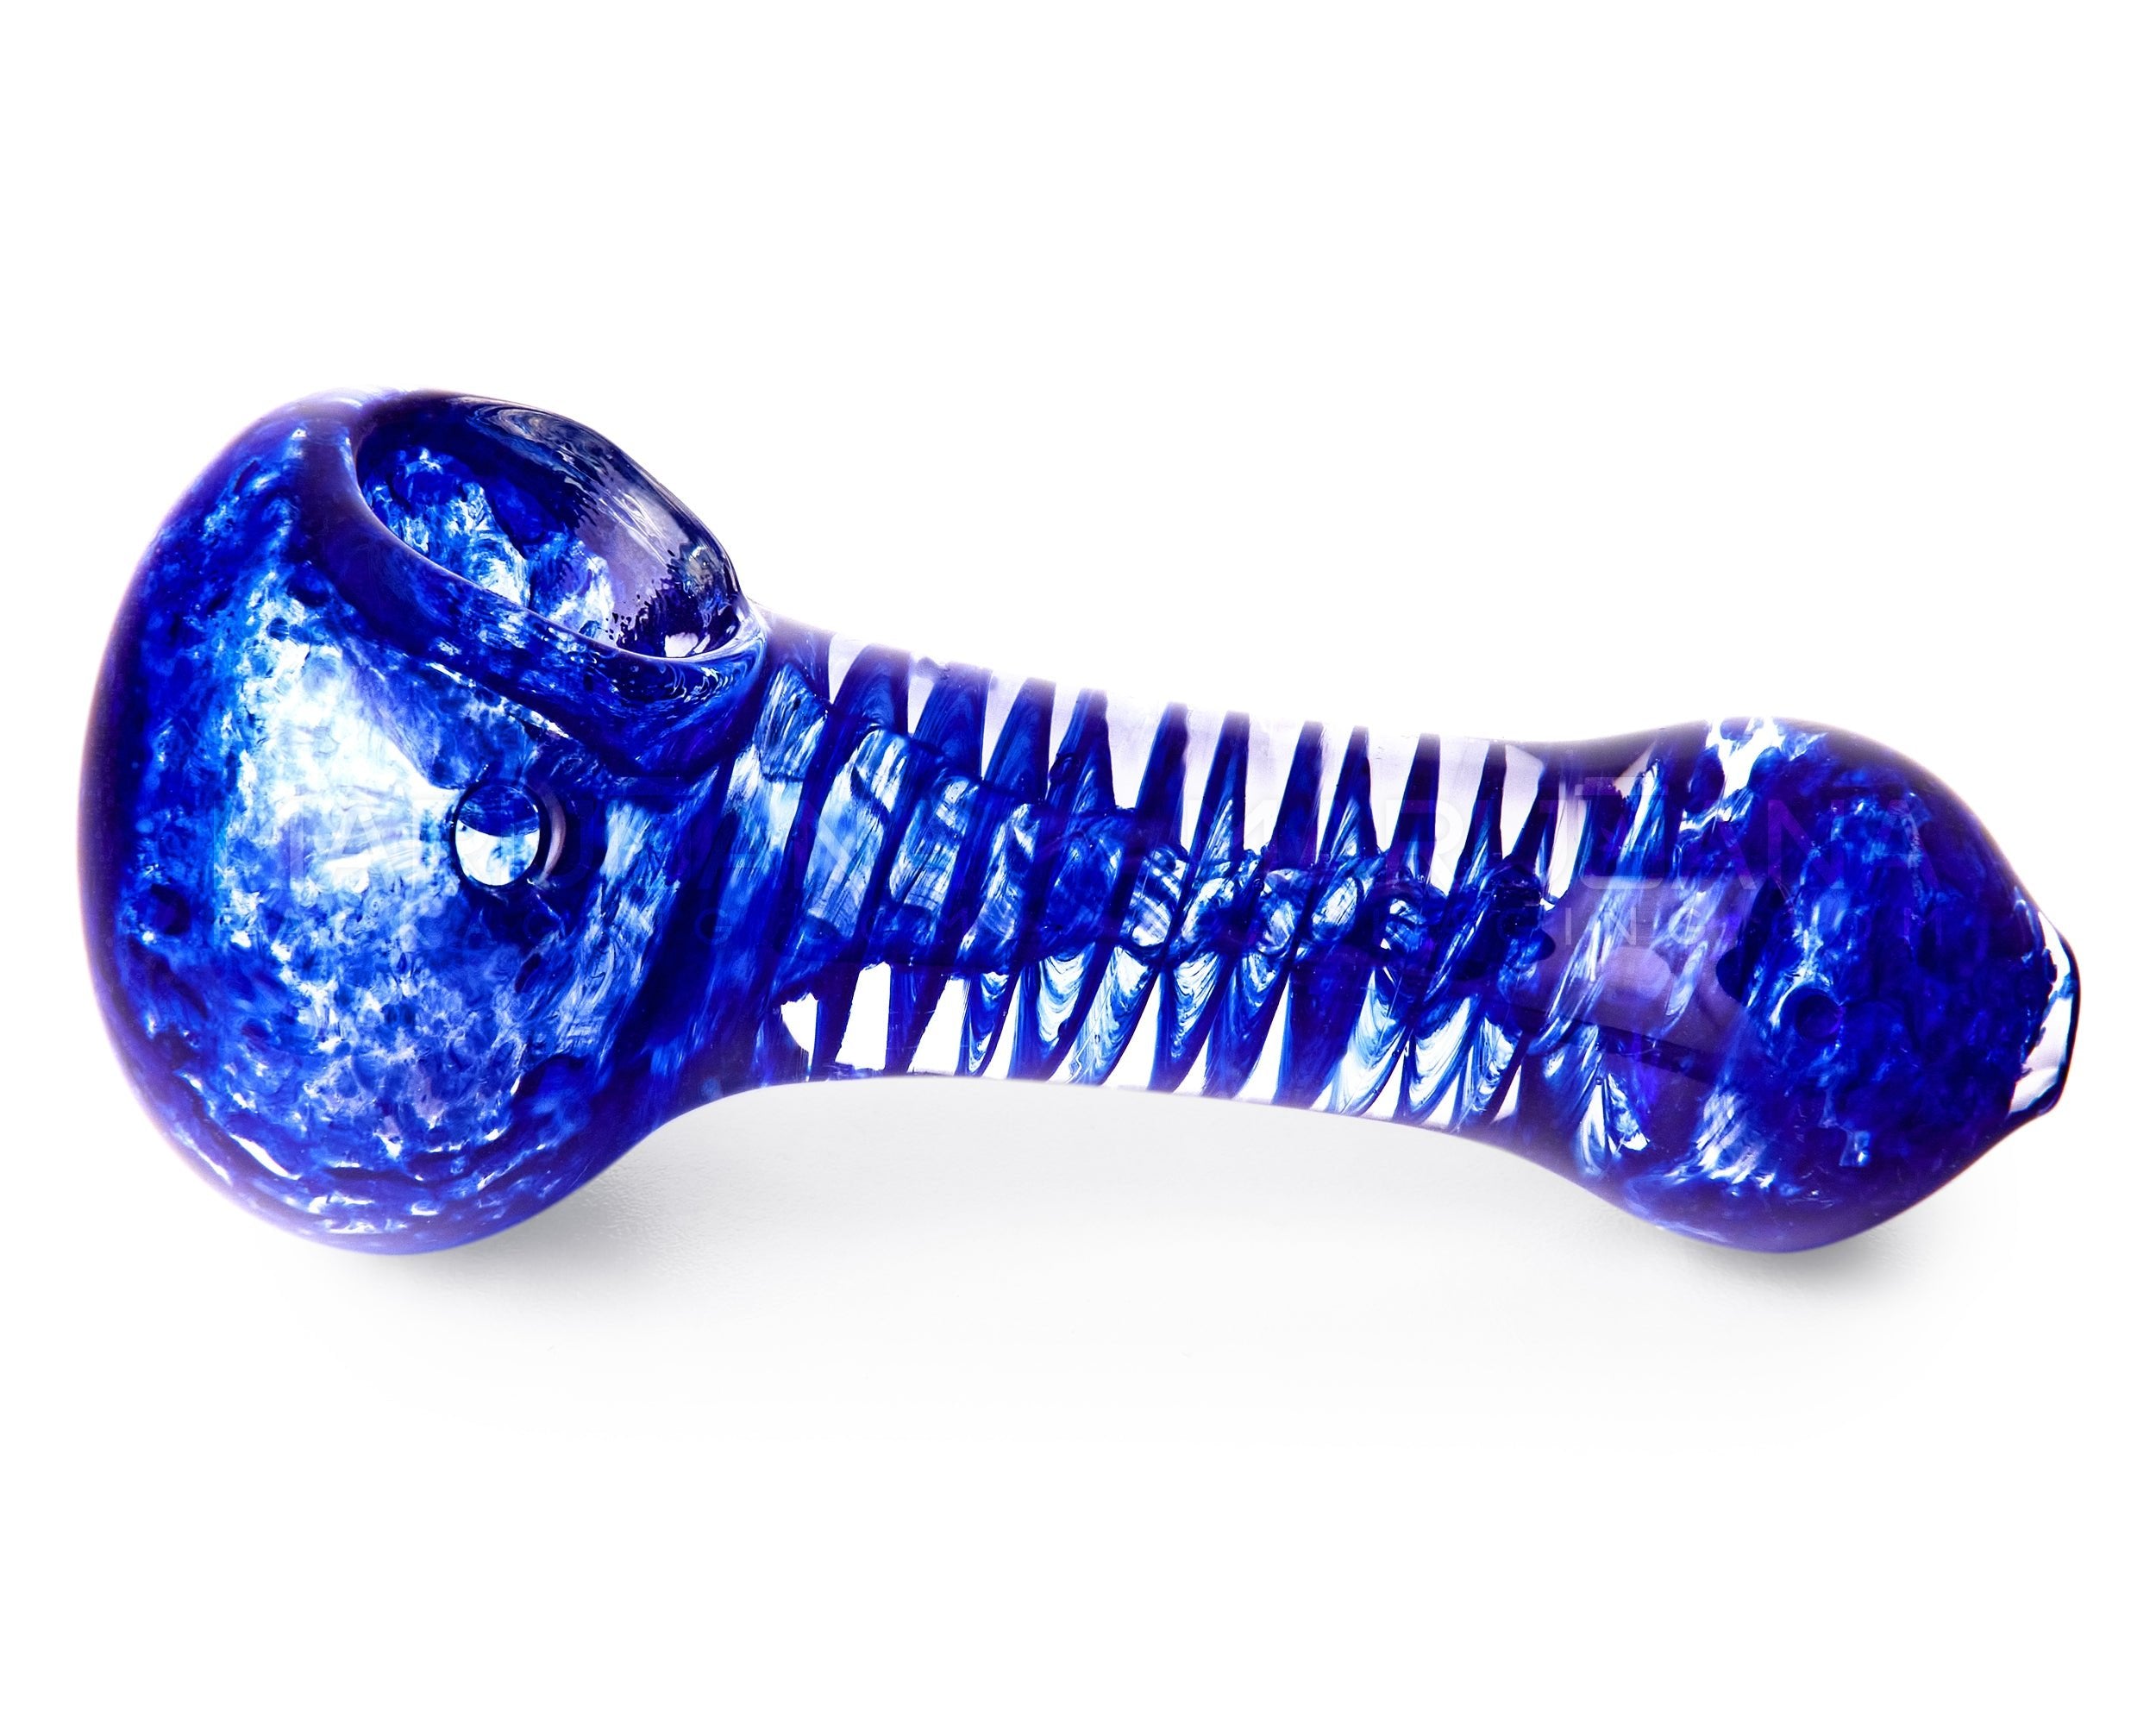 Spiral & Frit Spoon Hand Pipe | 3.5in Long - Glass - Assorted - 5